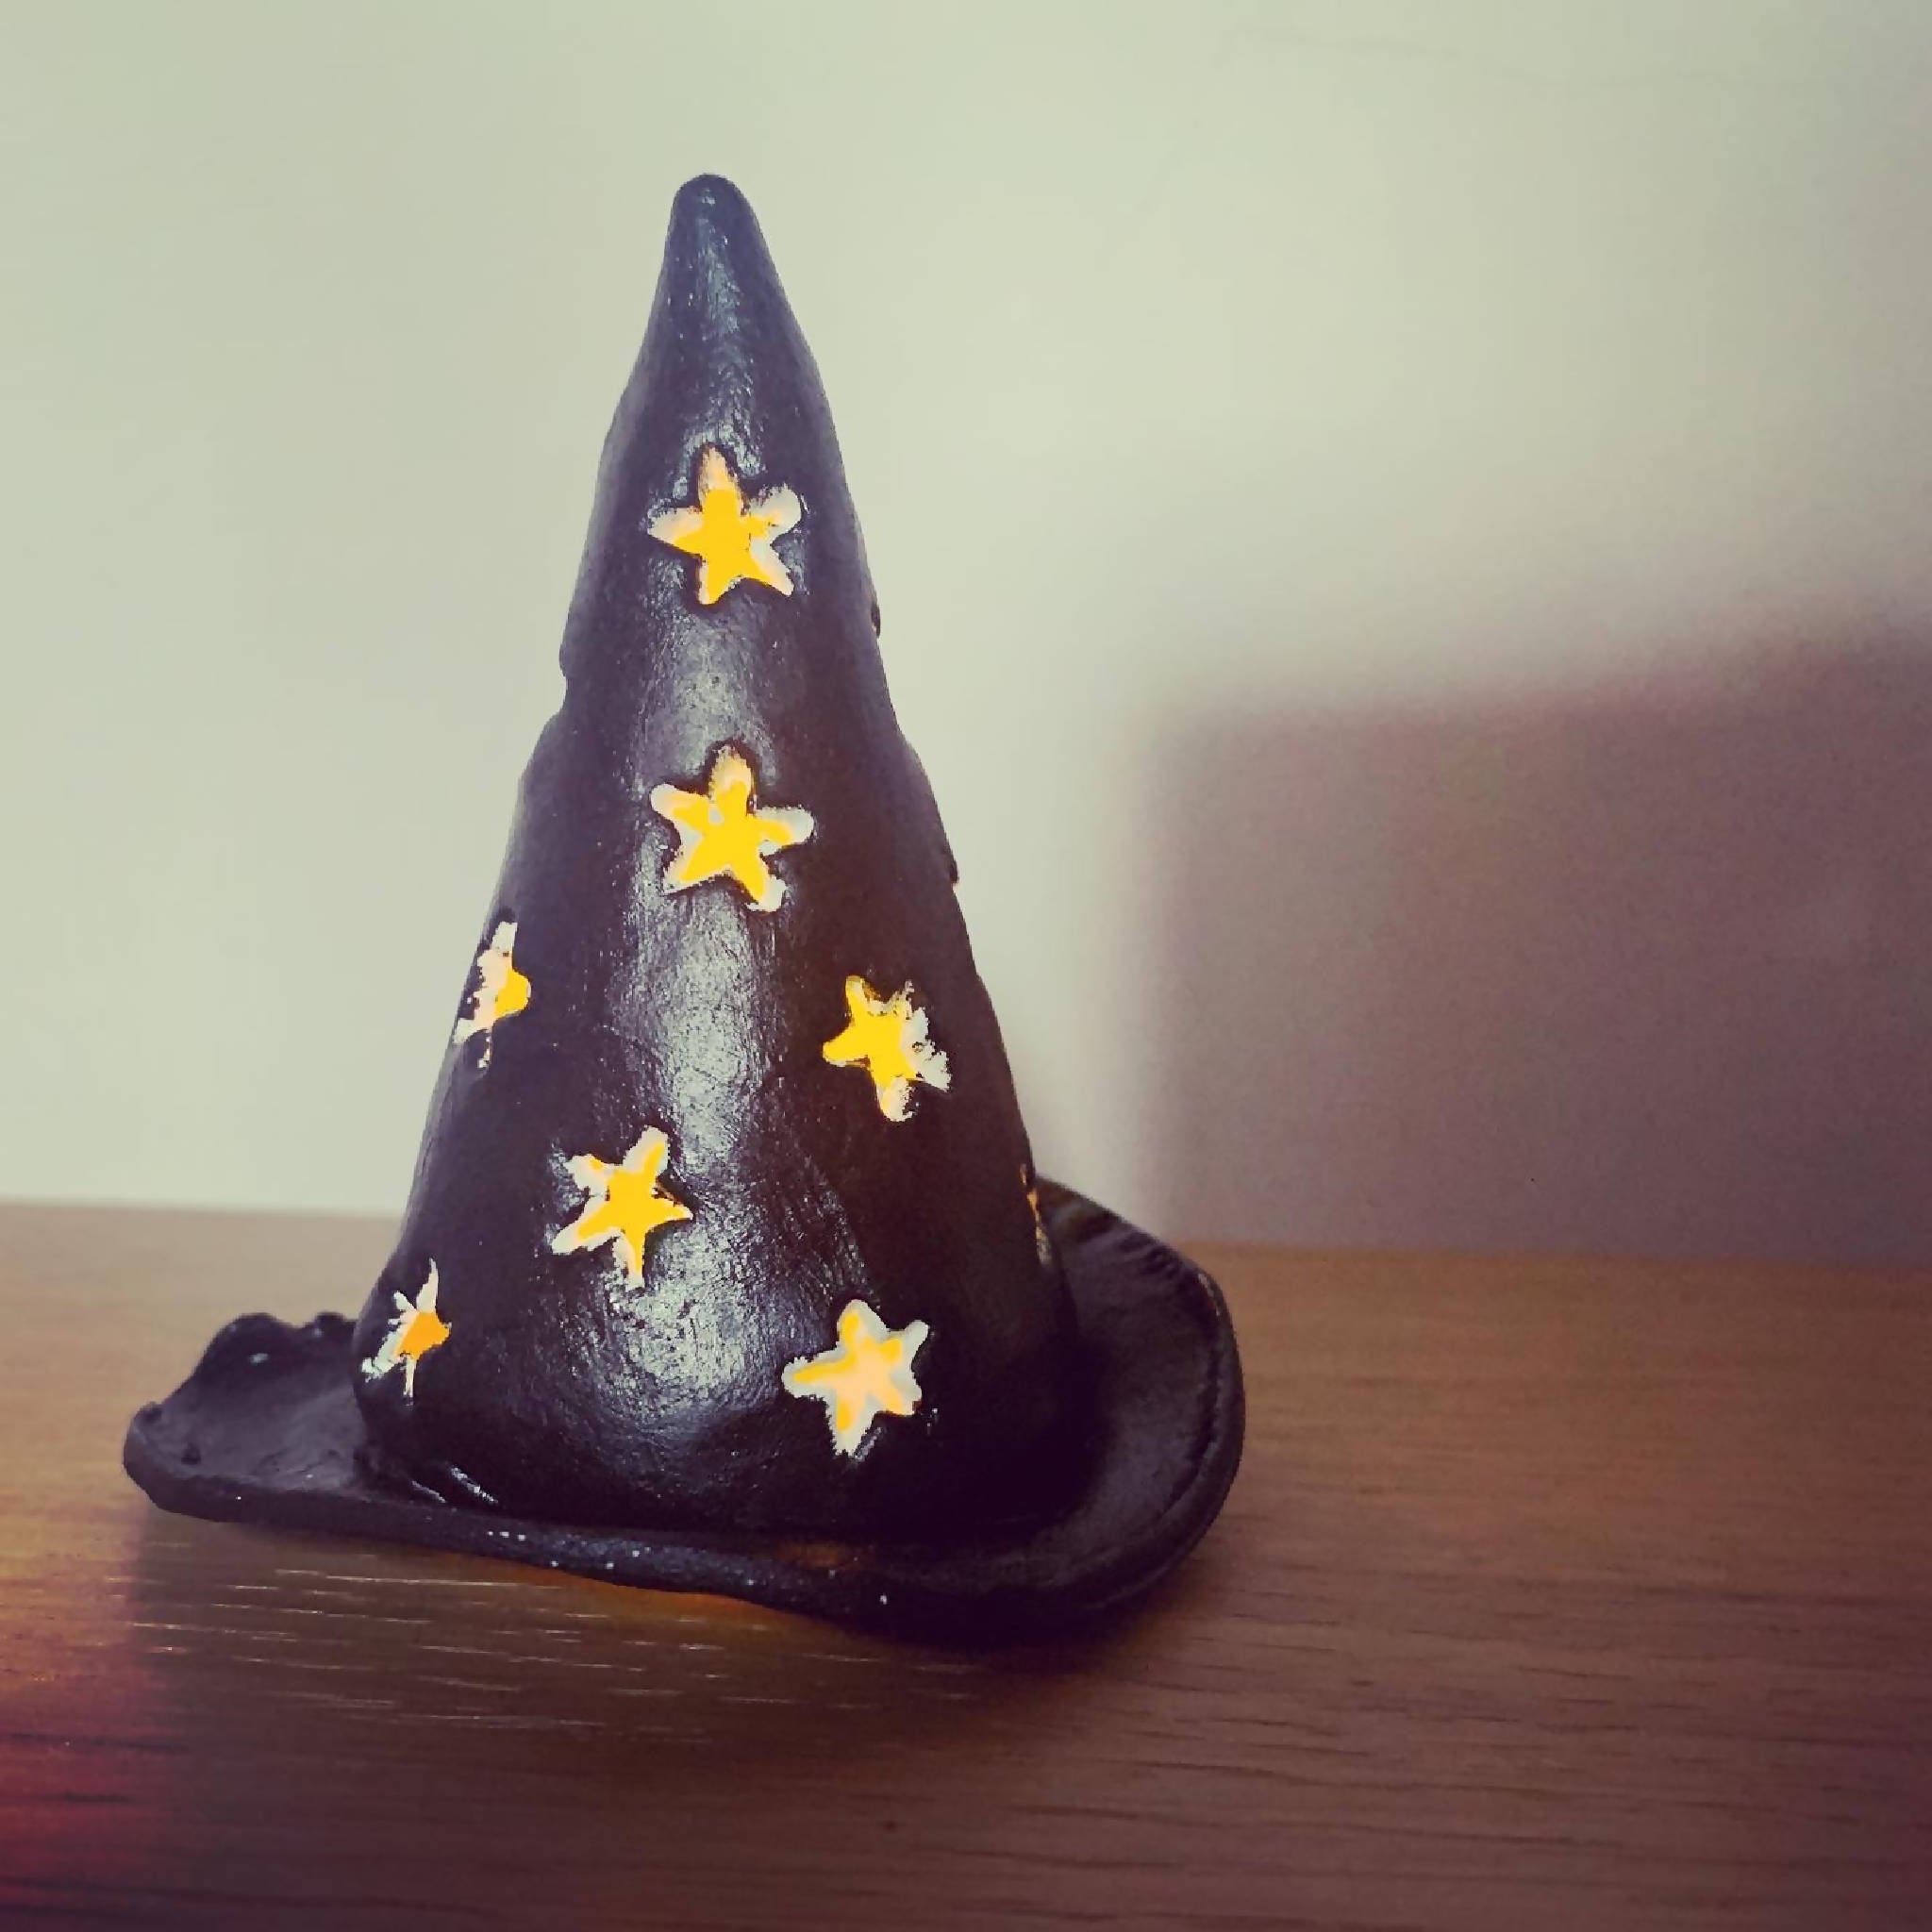 Witches Hat (or Wizards) Battery operated Halloween tealight holder